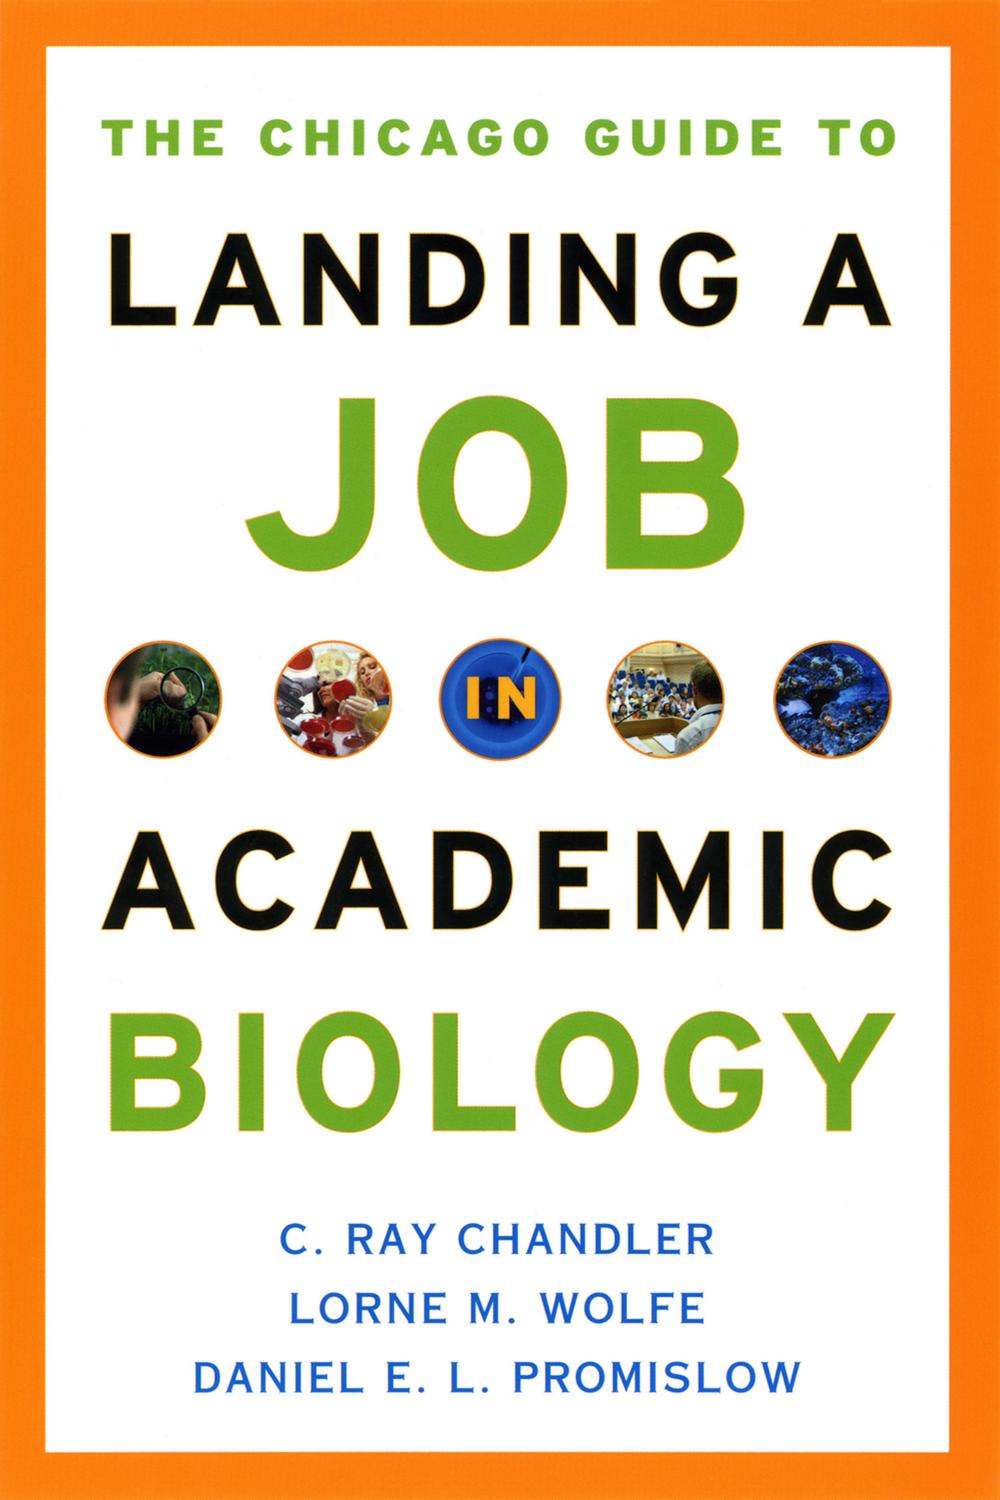 The Chicago Guide to Landing a Job in Academic Biology - C. Ray Chandler, Lorne M. Wolfe, Daniel E. L. Promislow